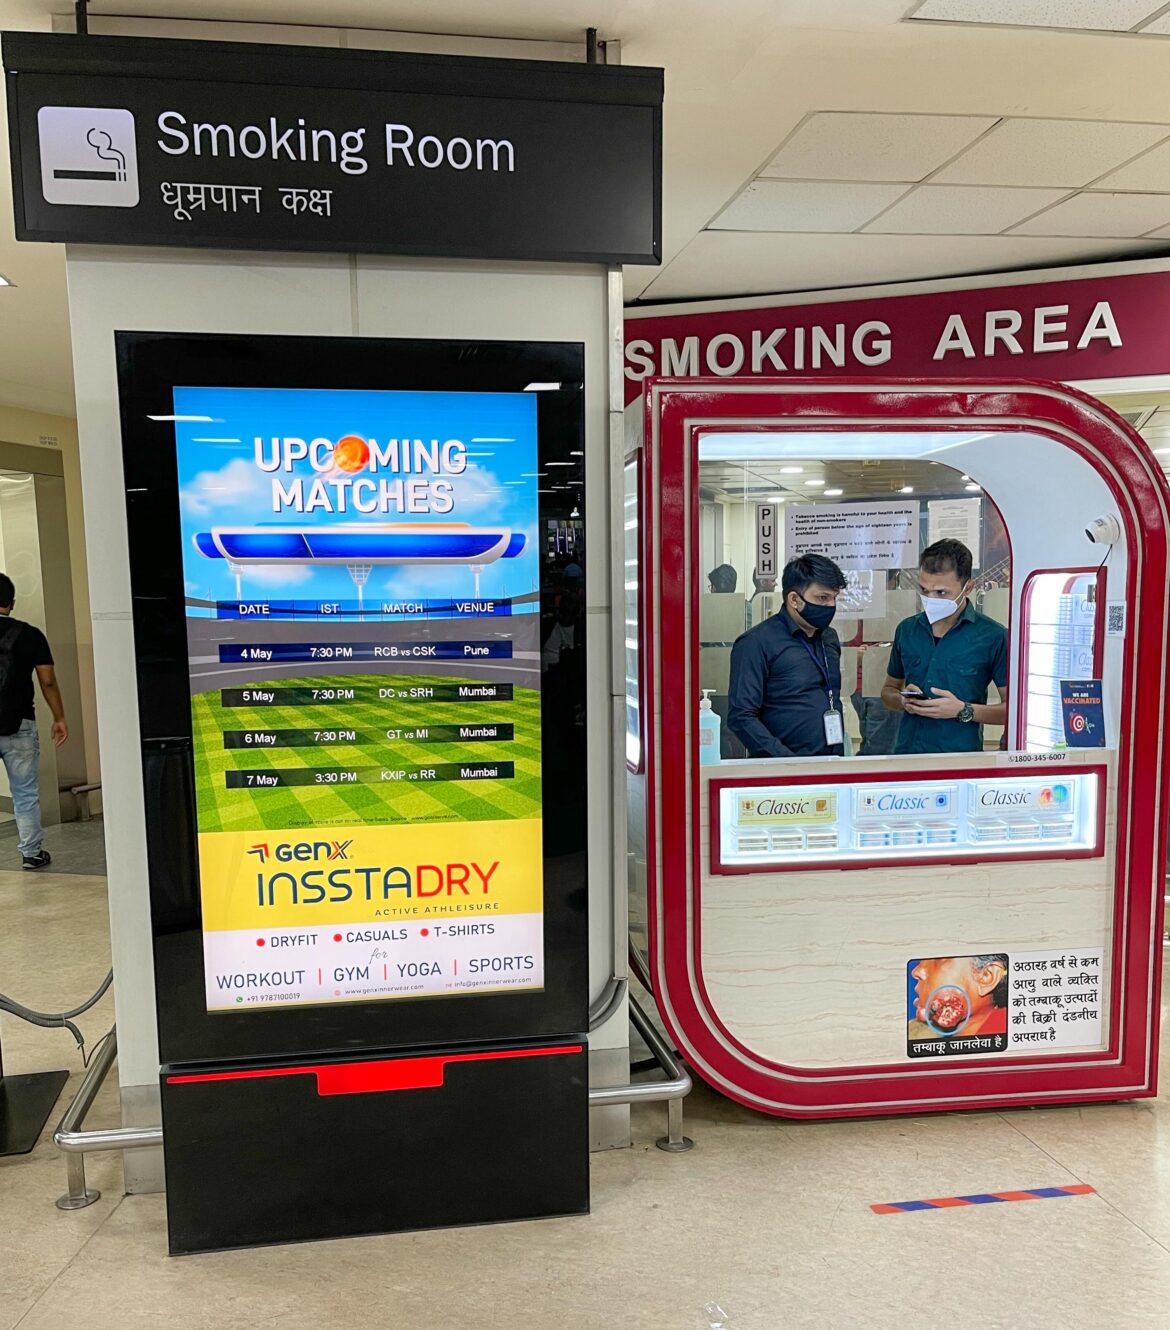 Conveniently Find Smoking Areas at Airports with AirportSmokingZones.com